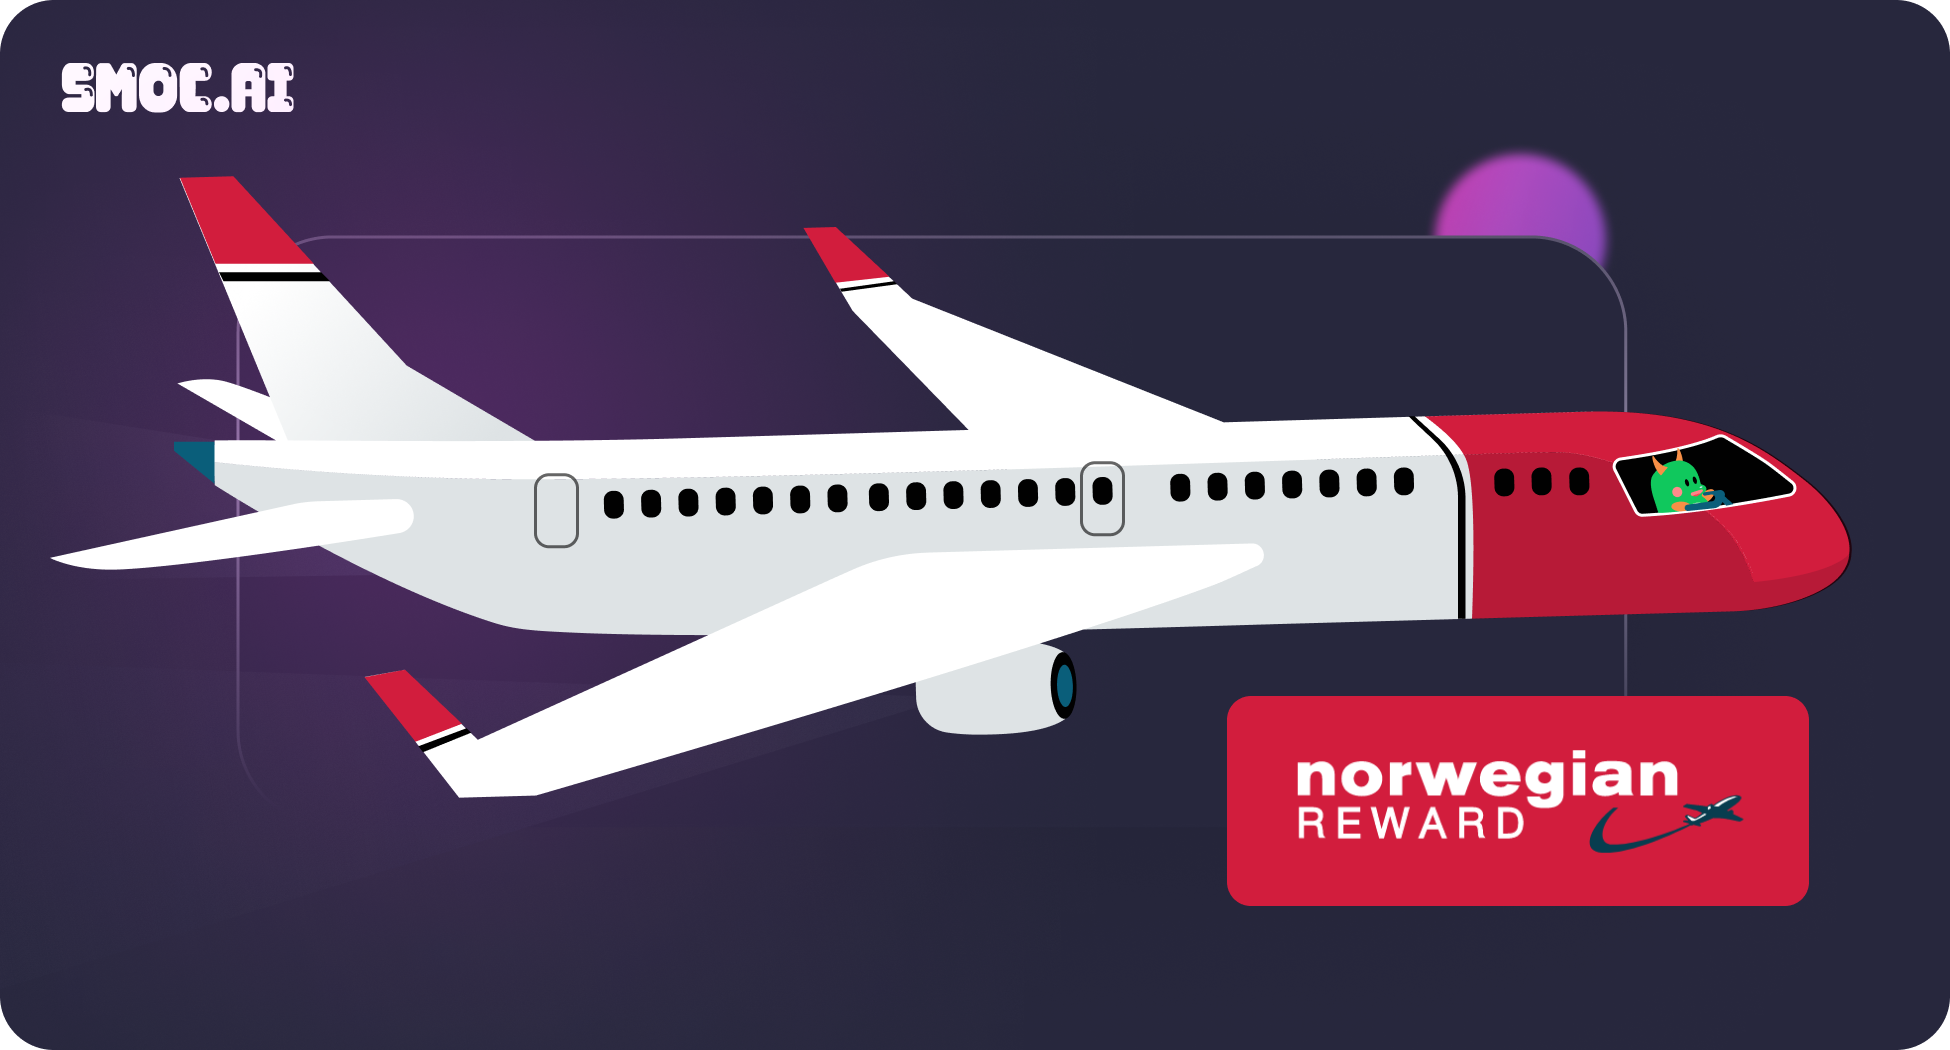 How Norwegian Reward’s quiz got a 93% interaction rate and 92% completion rate